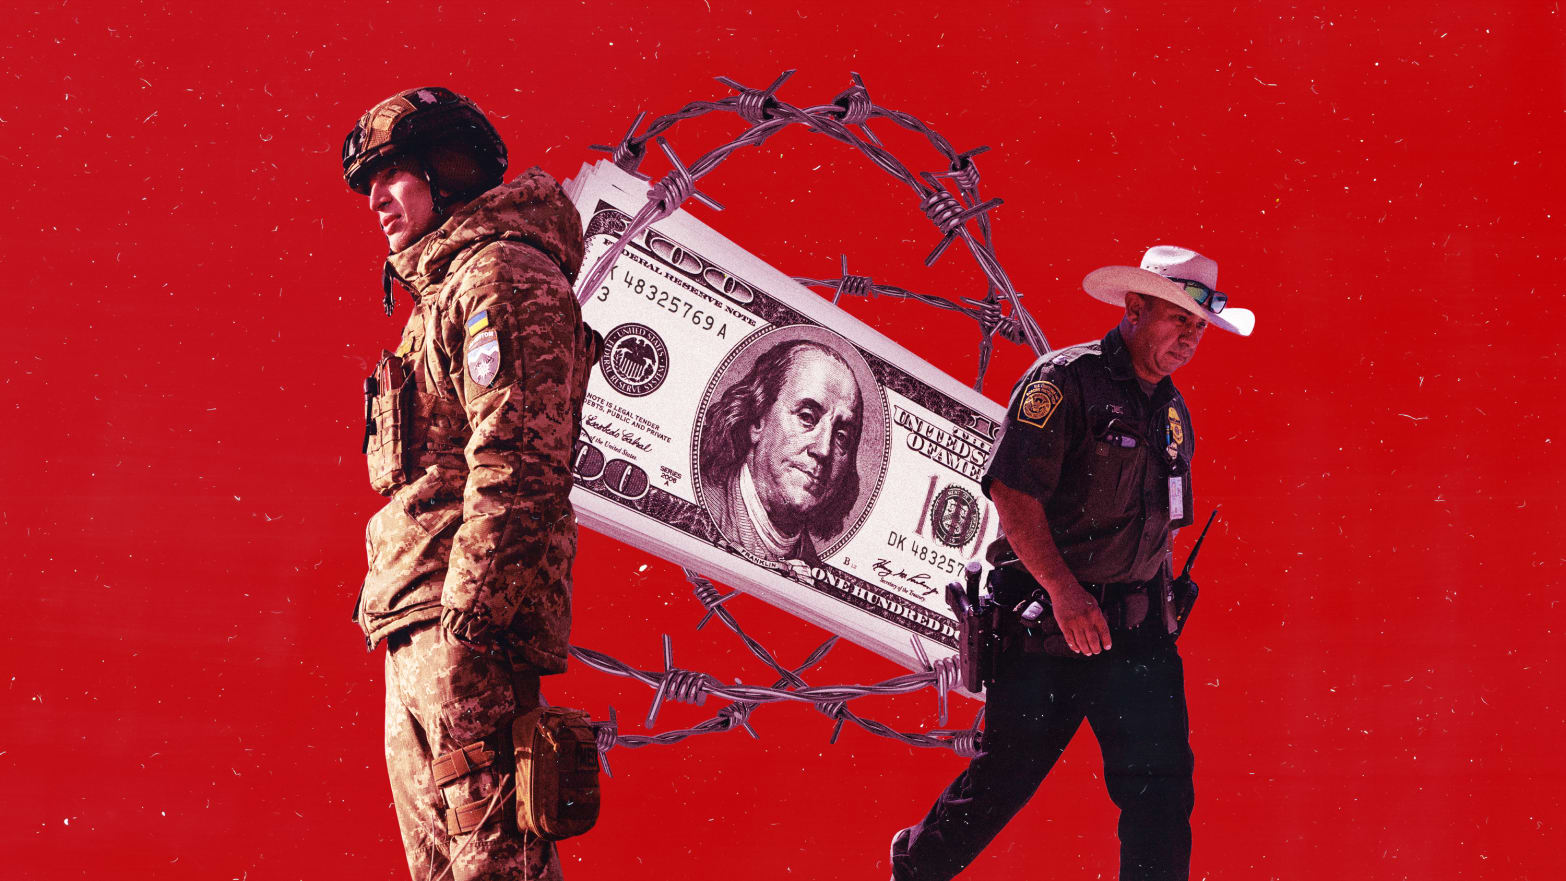 A photo illustration of a Ukrainian soldier, US Border Patrol agent, and money wrapped in barbed wire.